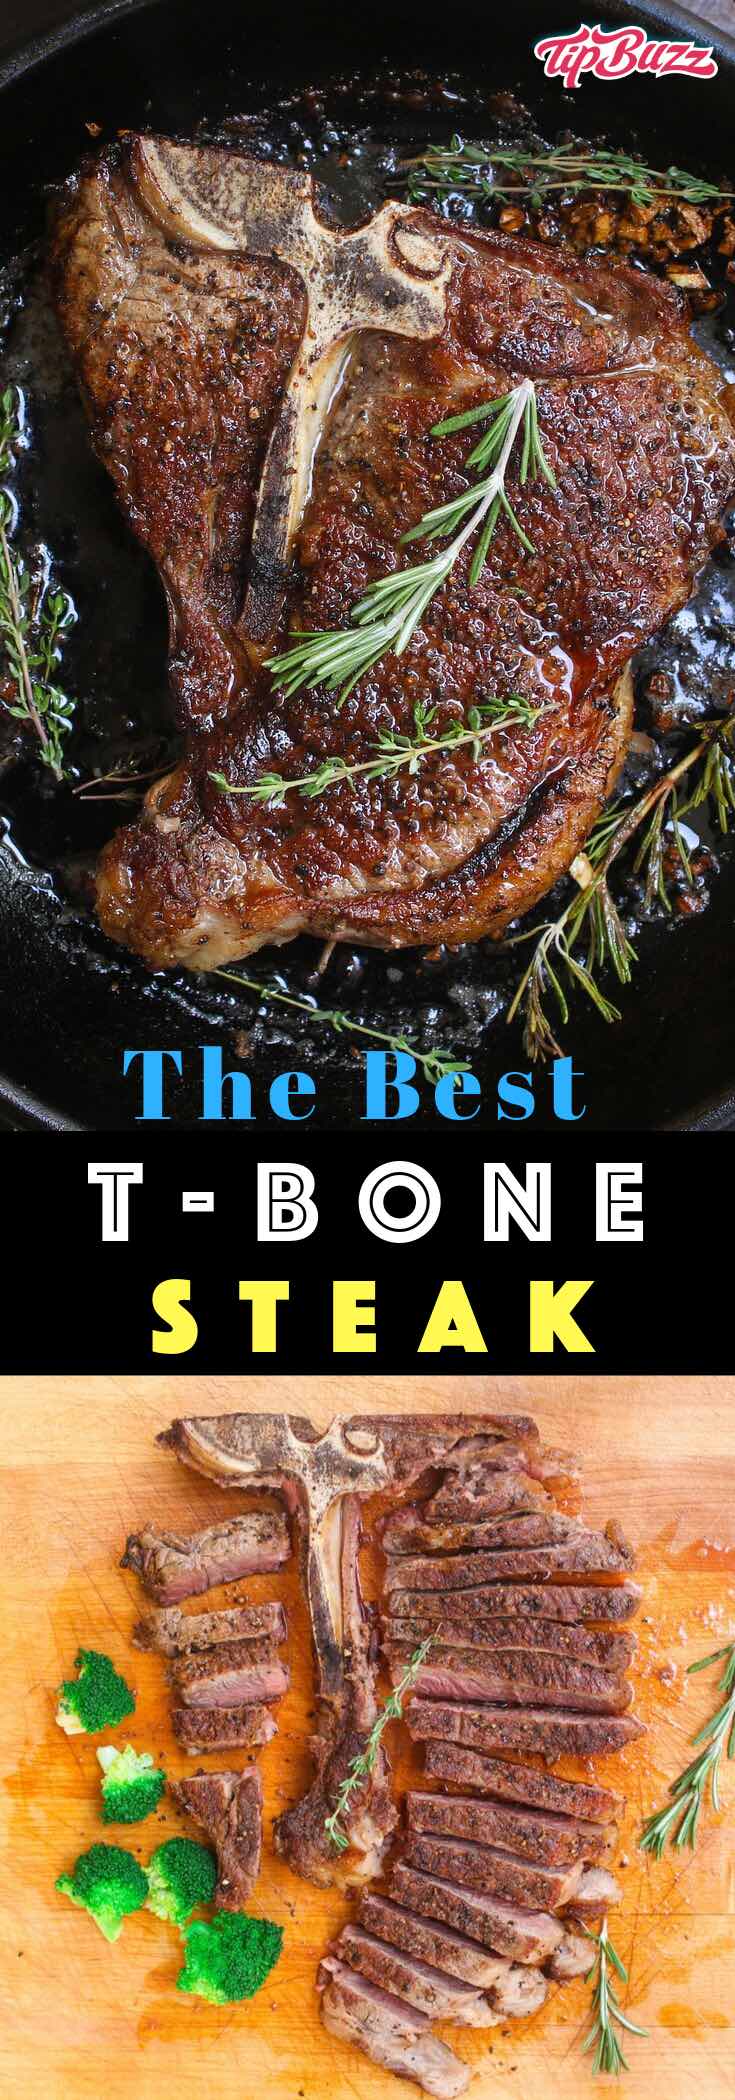 T-bone Steak seared to caramelized perfection on the outside and juicy in the middle. It’s full of flavor with no marinating needed. Ready in less than 15 minutes for a quick and easy family favorite!